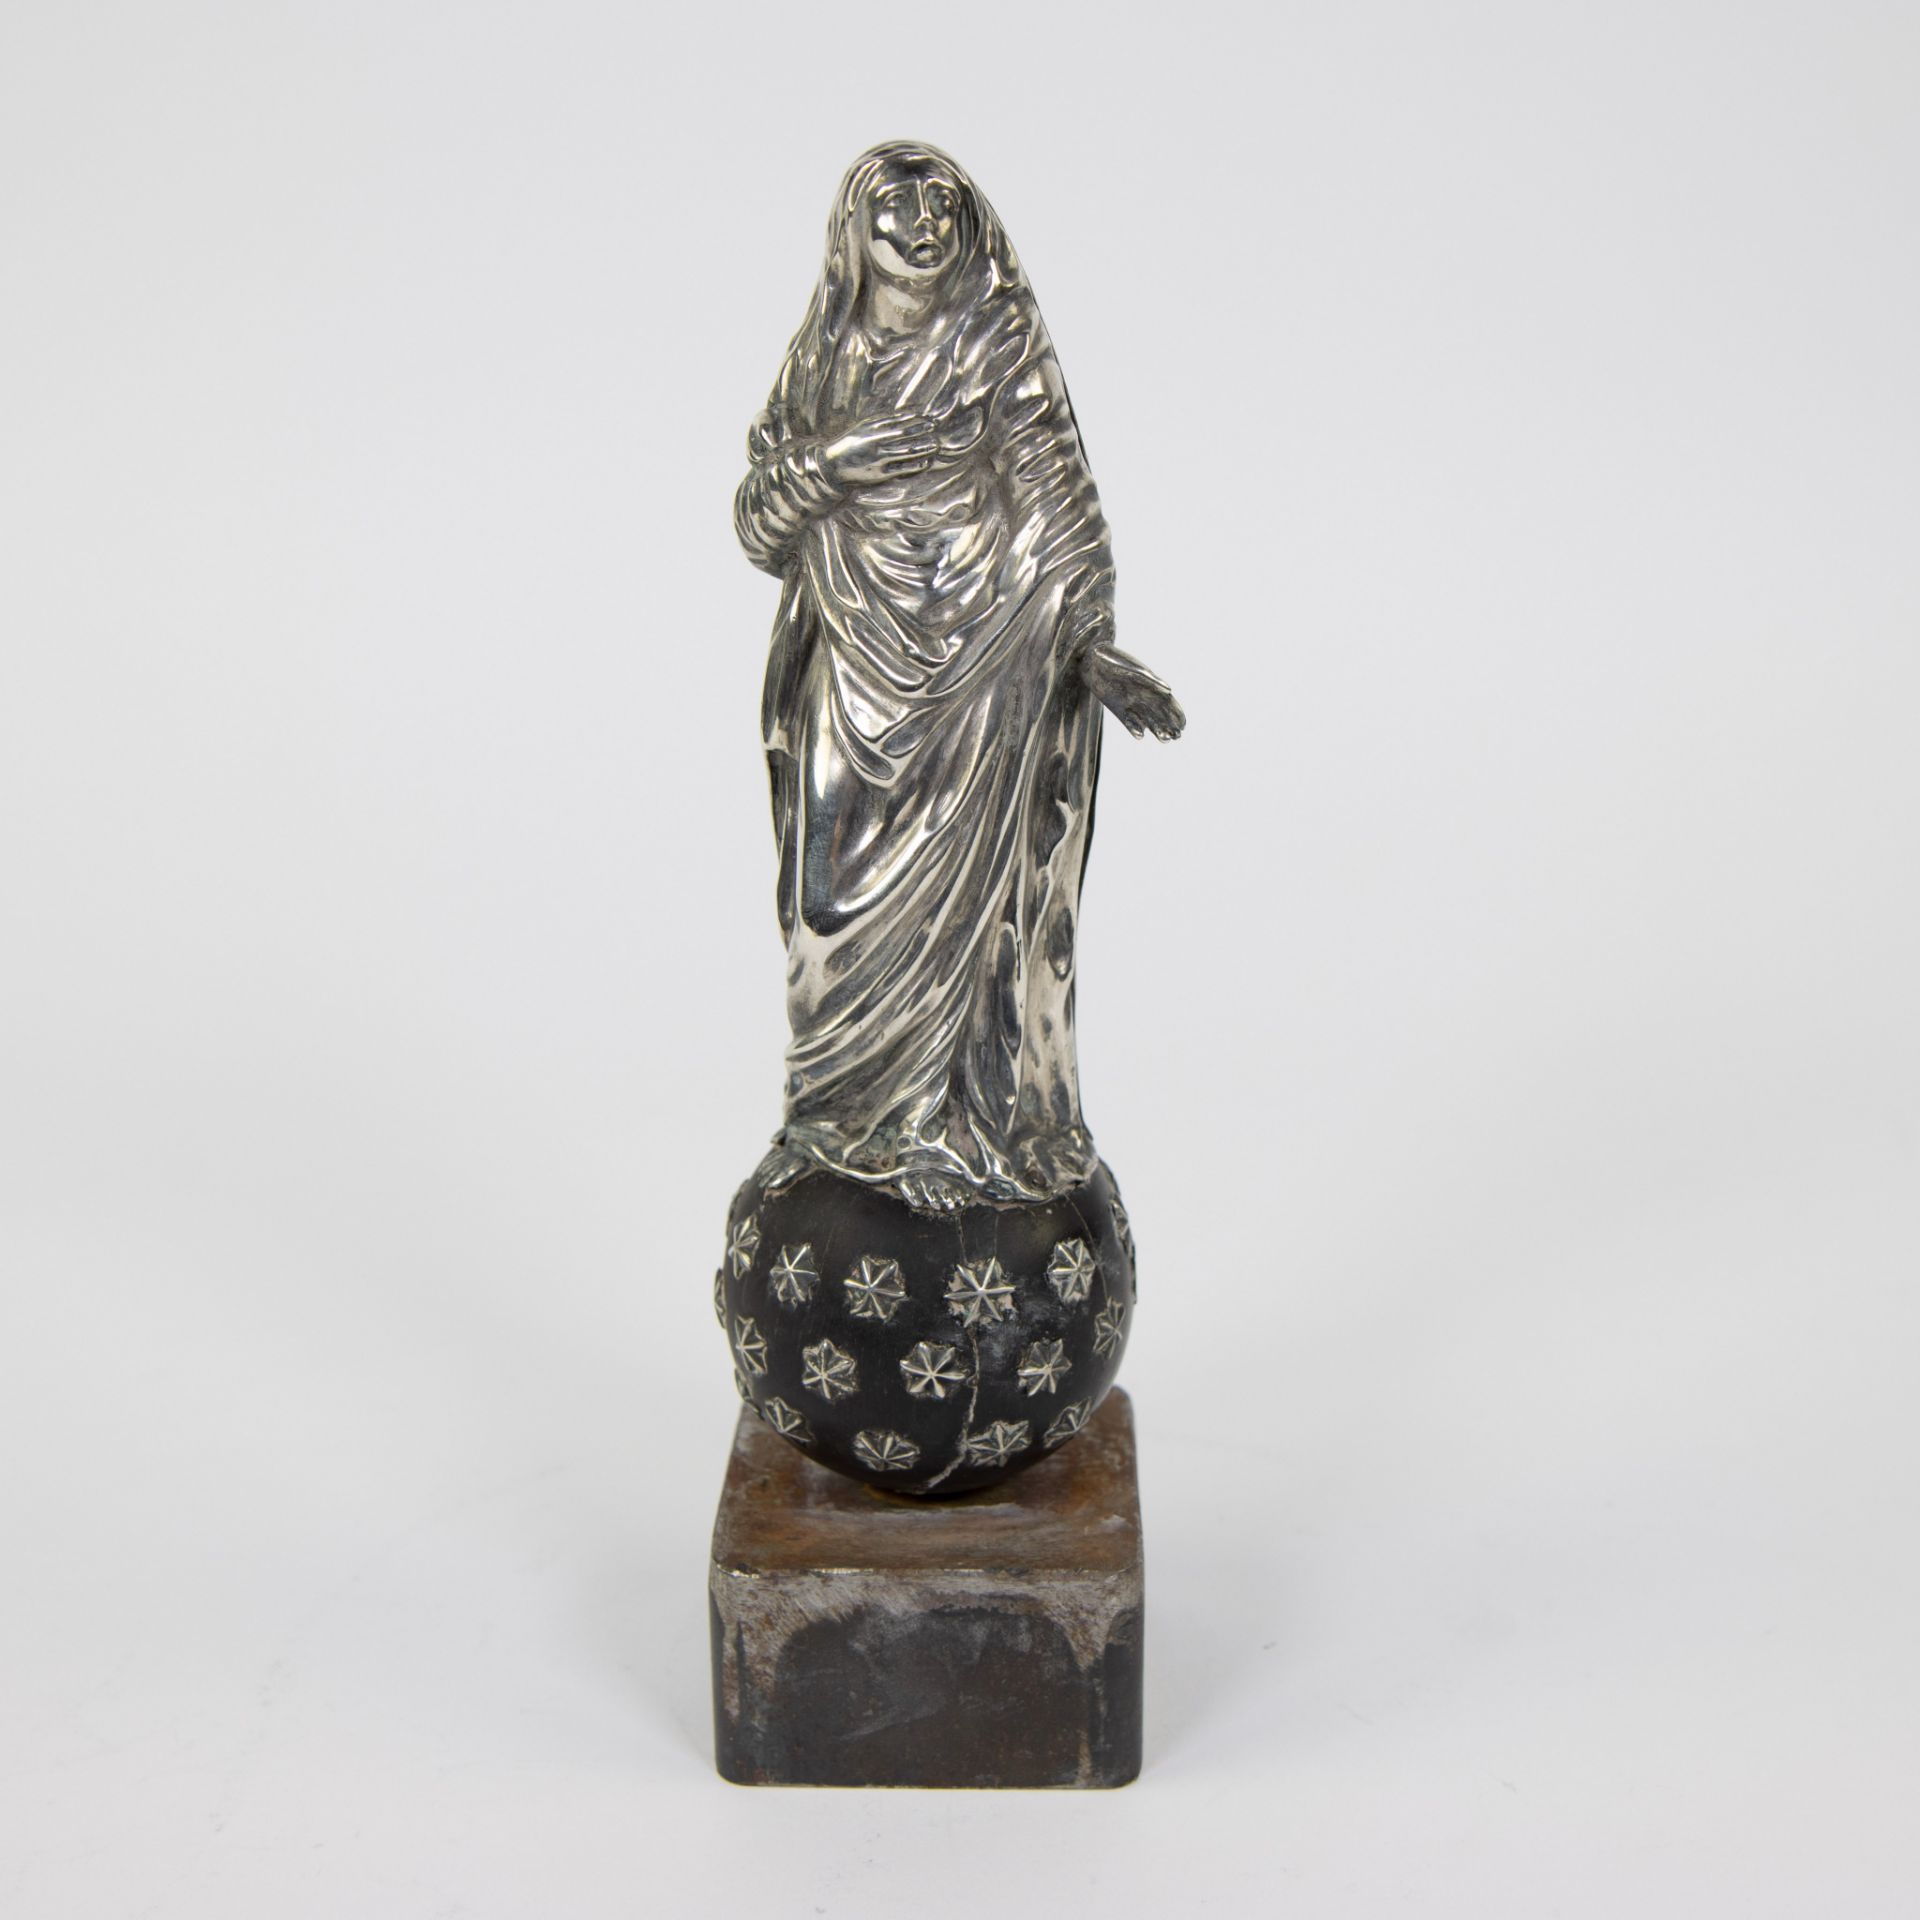 Church silver, decoration for tabernacle Madonna 19th century